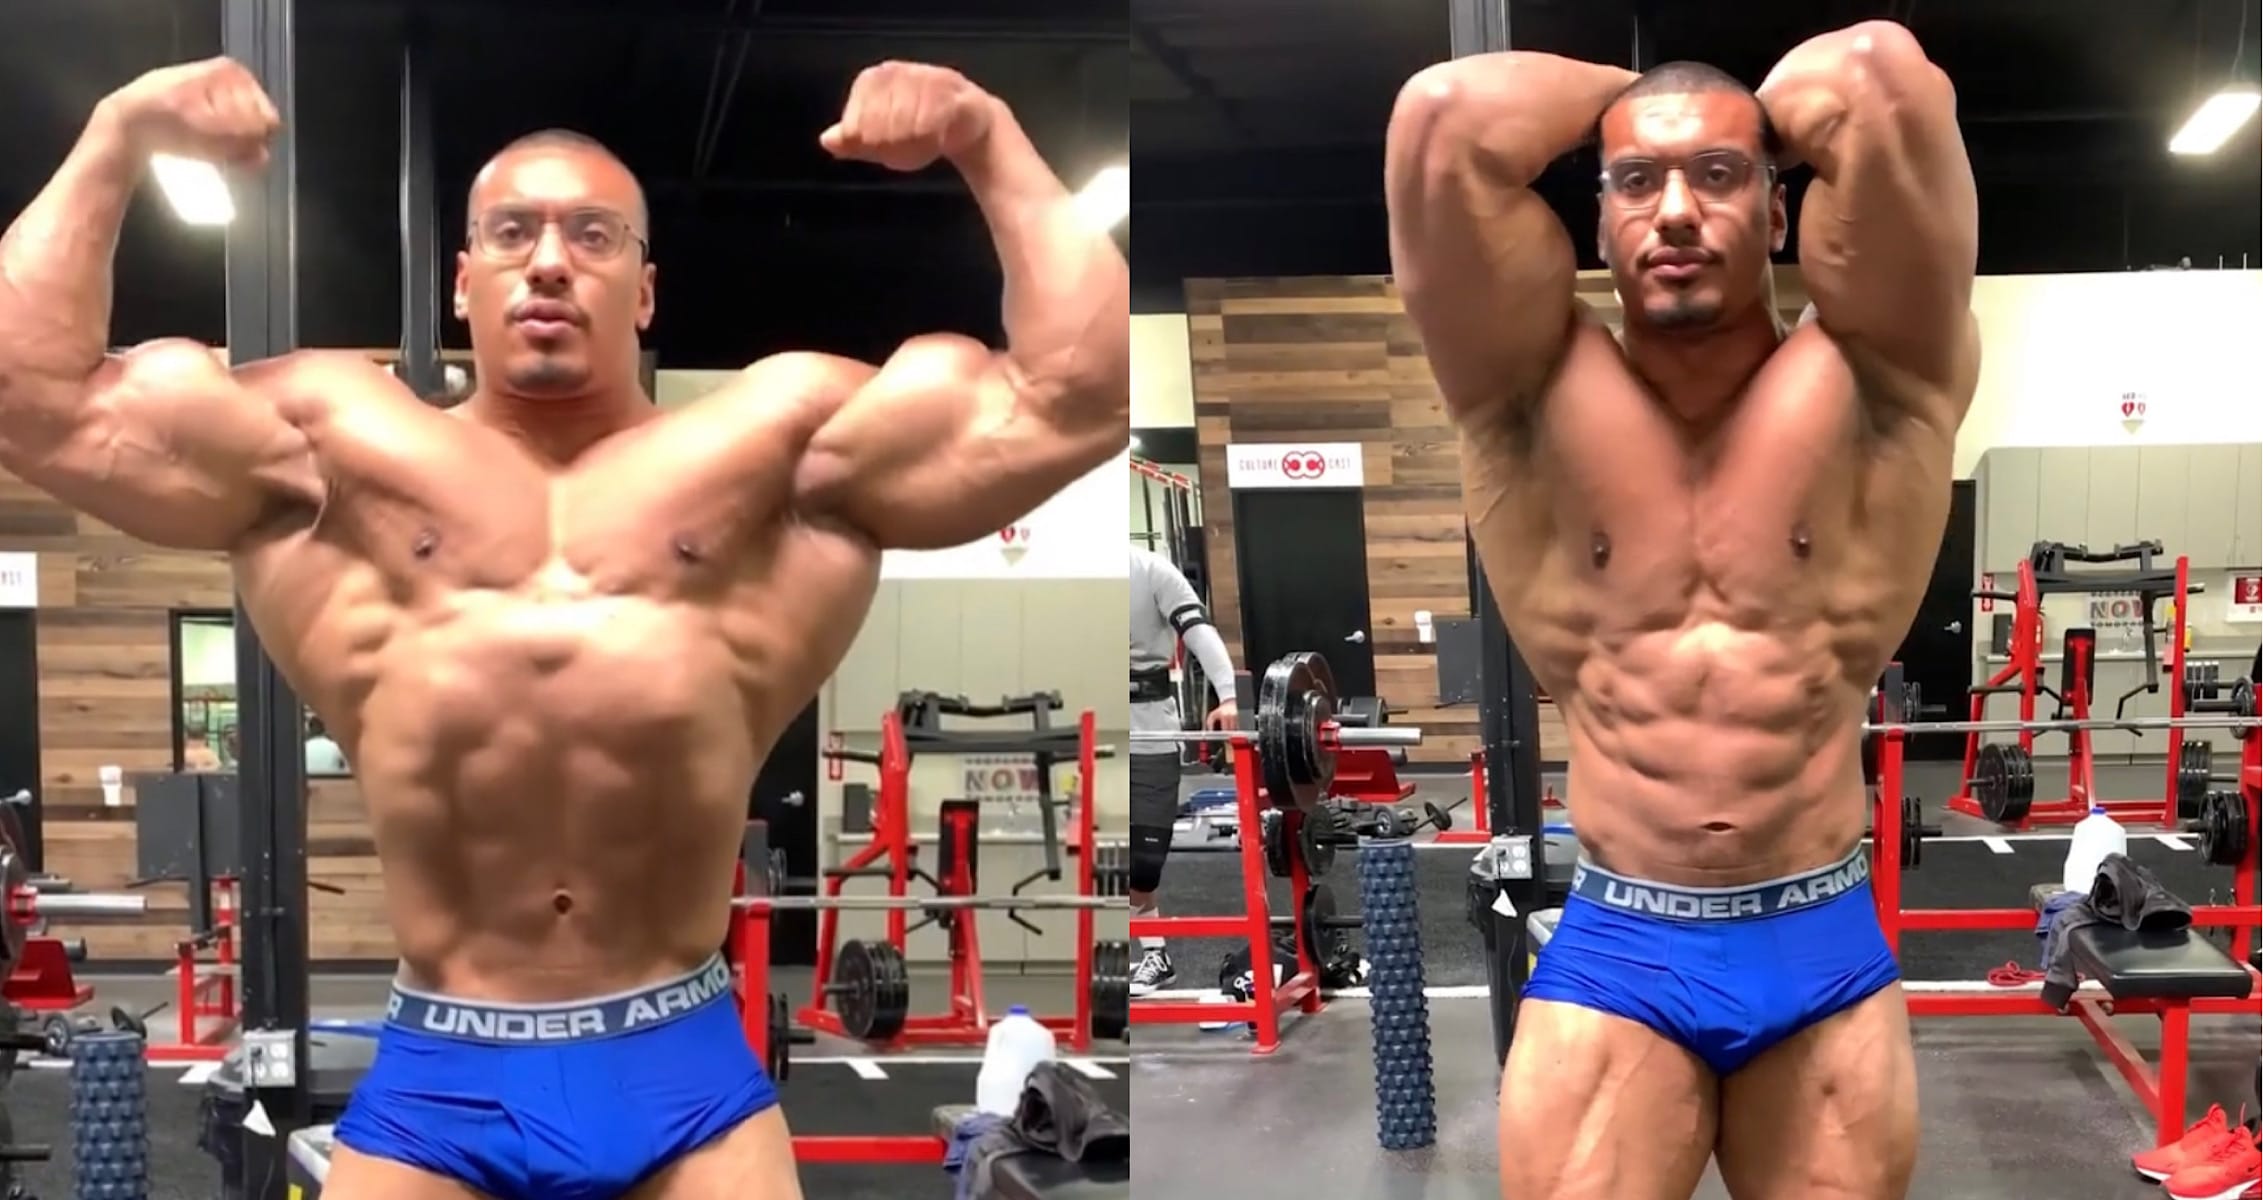 Larry Wheels Hints at Competing in Classic Physique Division